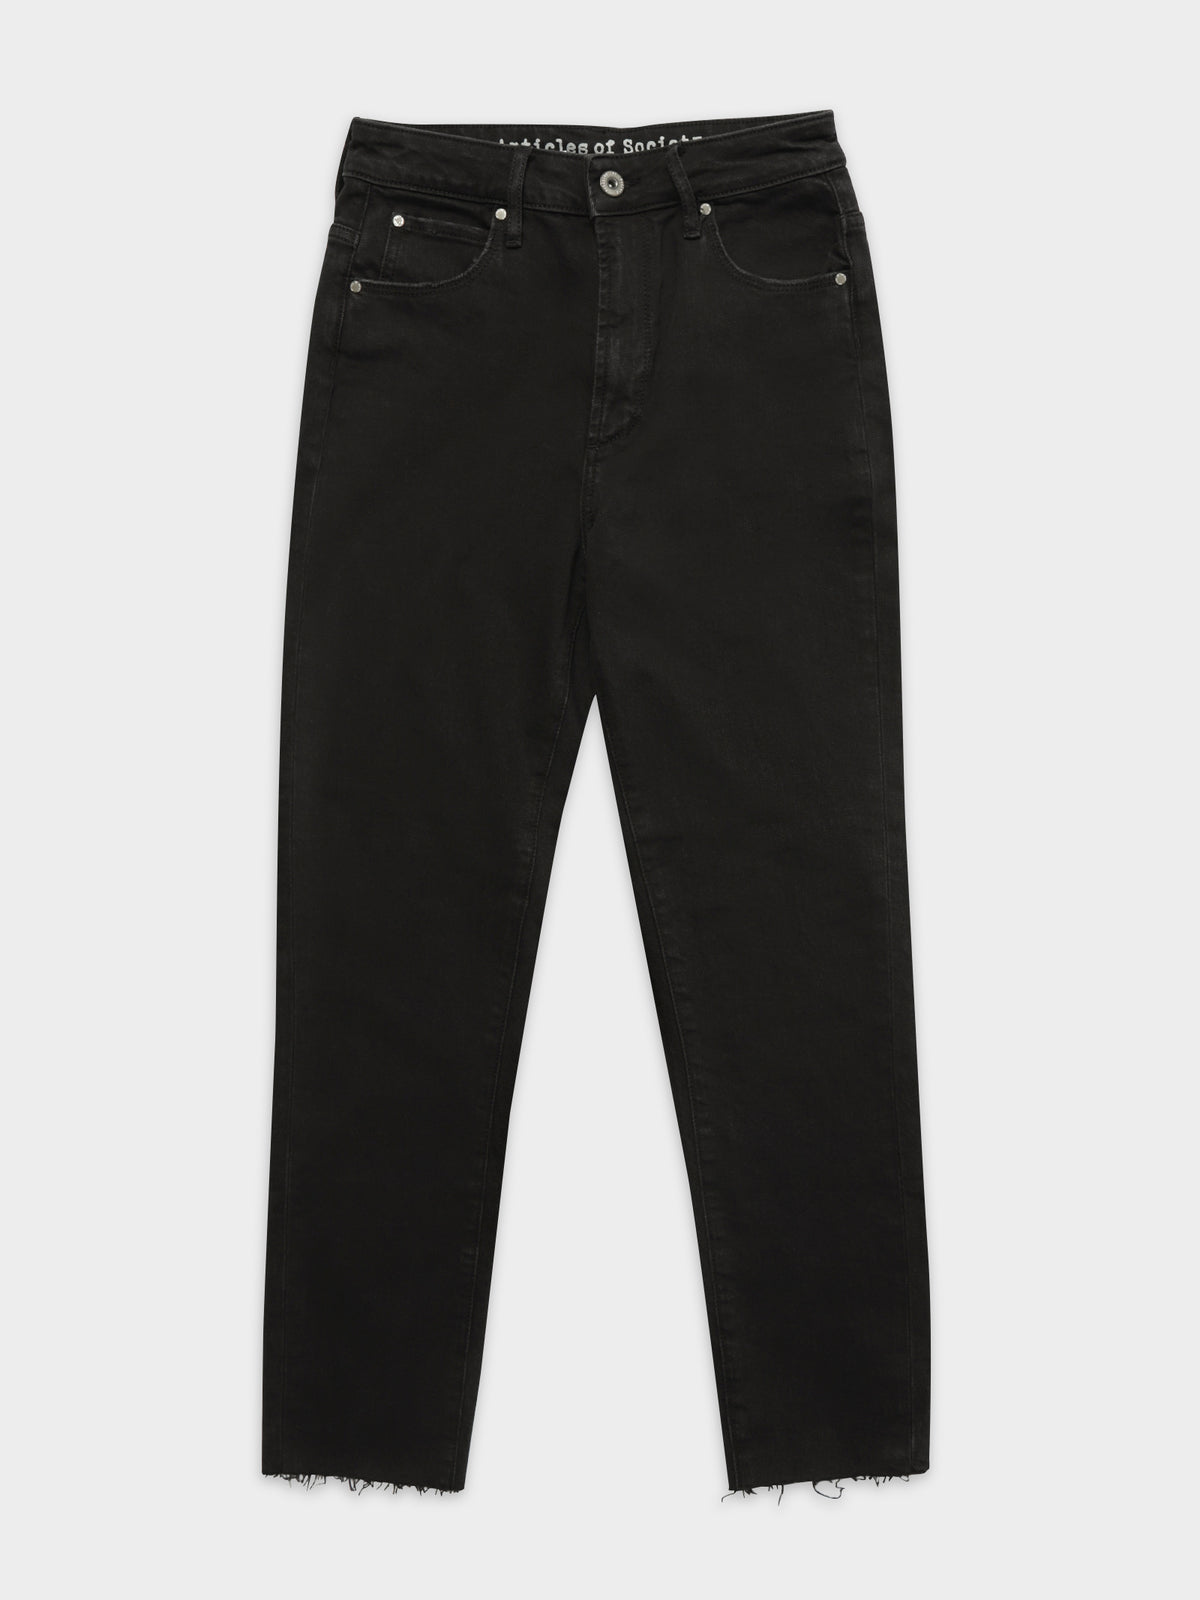 High Amy Mum Slim Jeans in Black Out